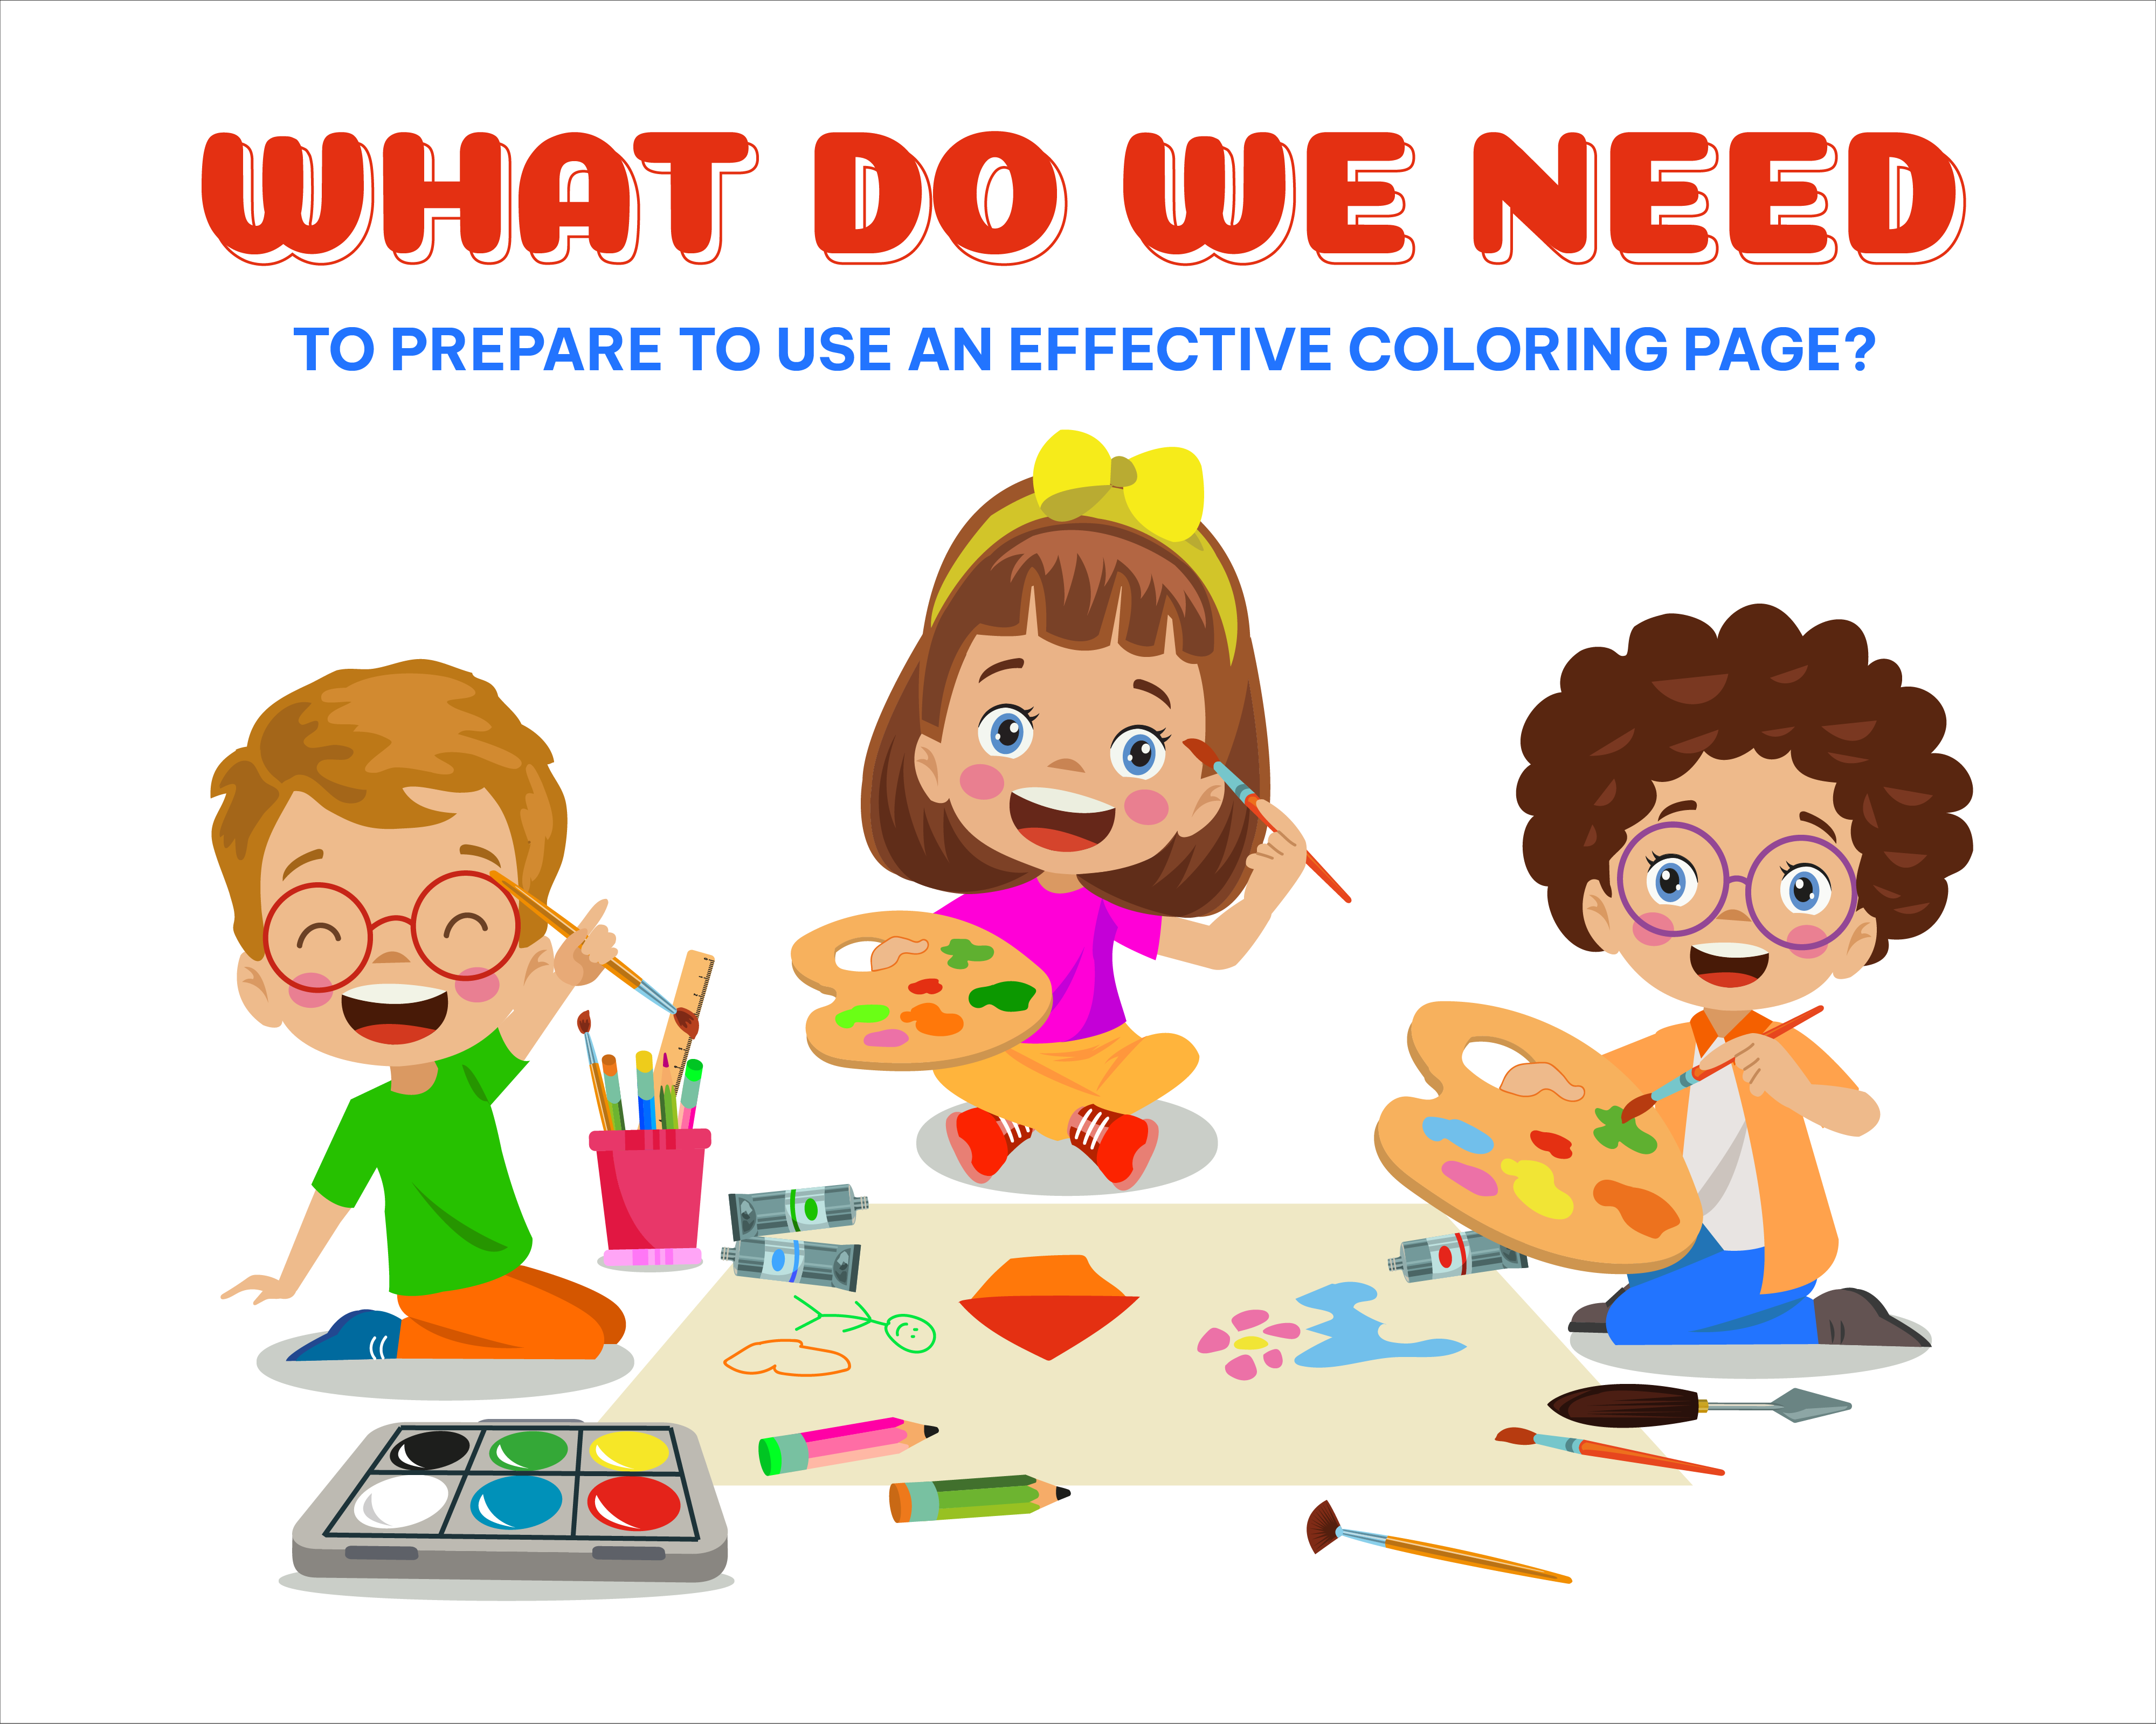 What do we need to prepare to use an effective coloring page?